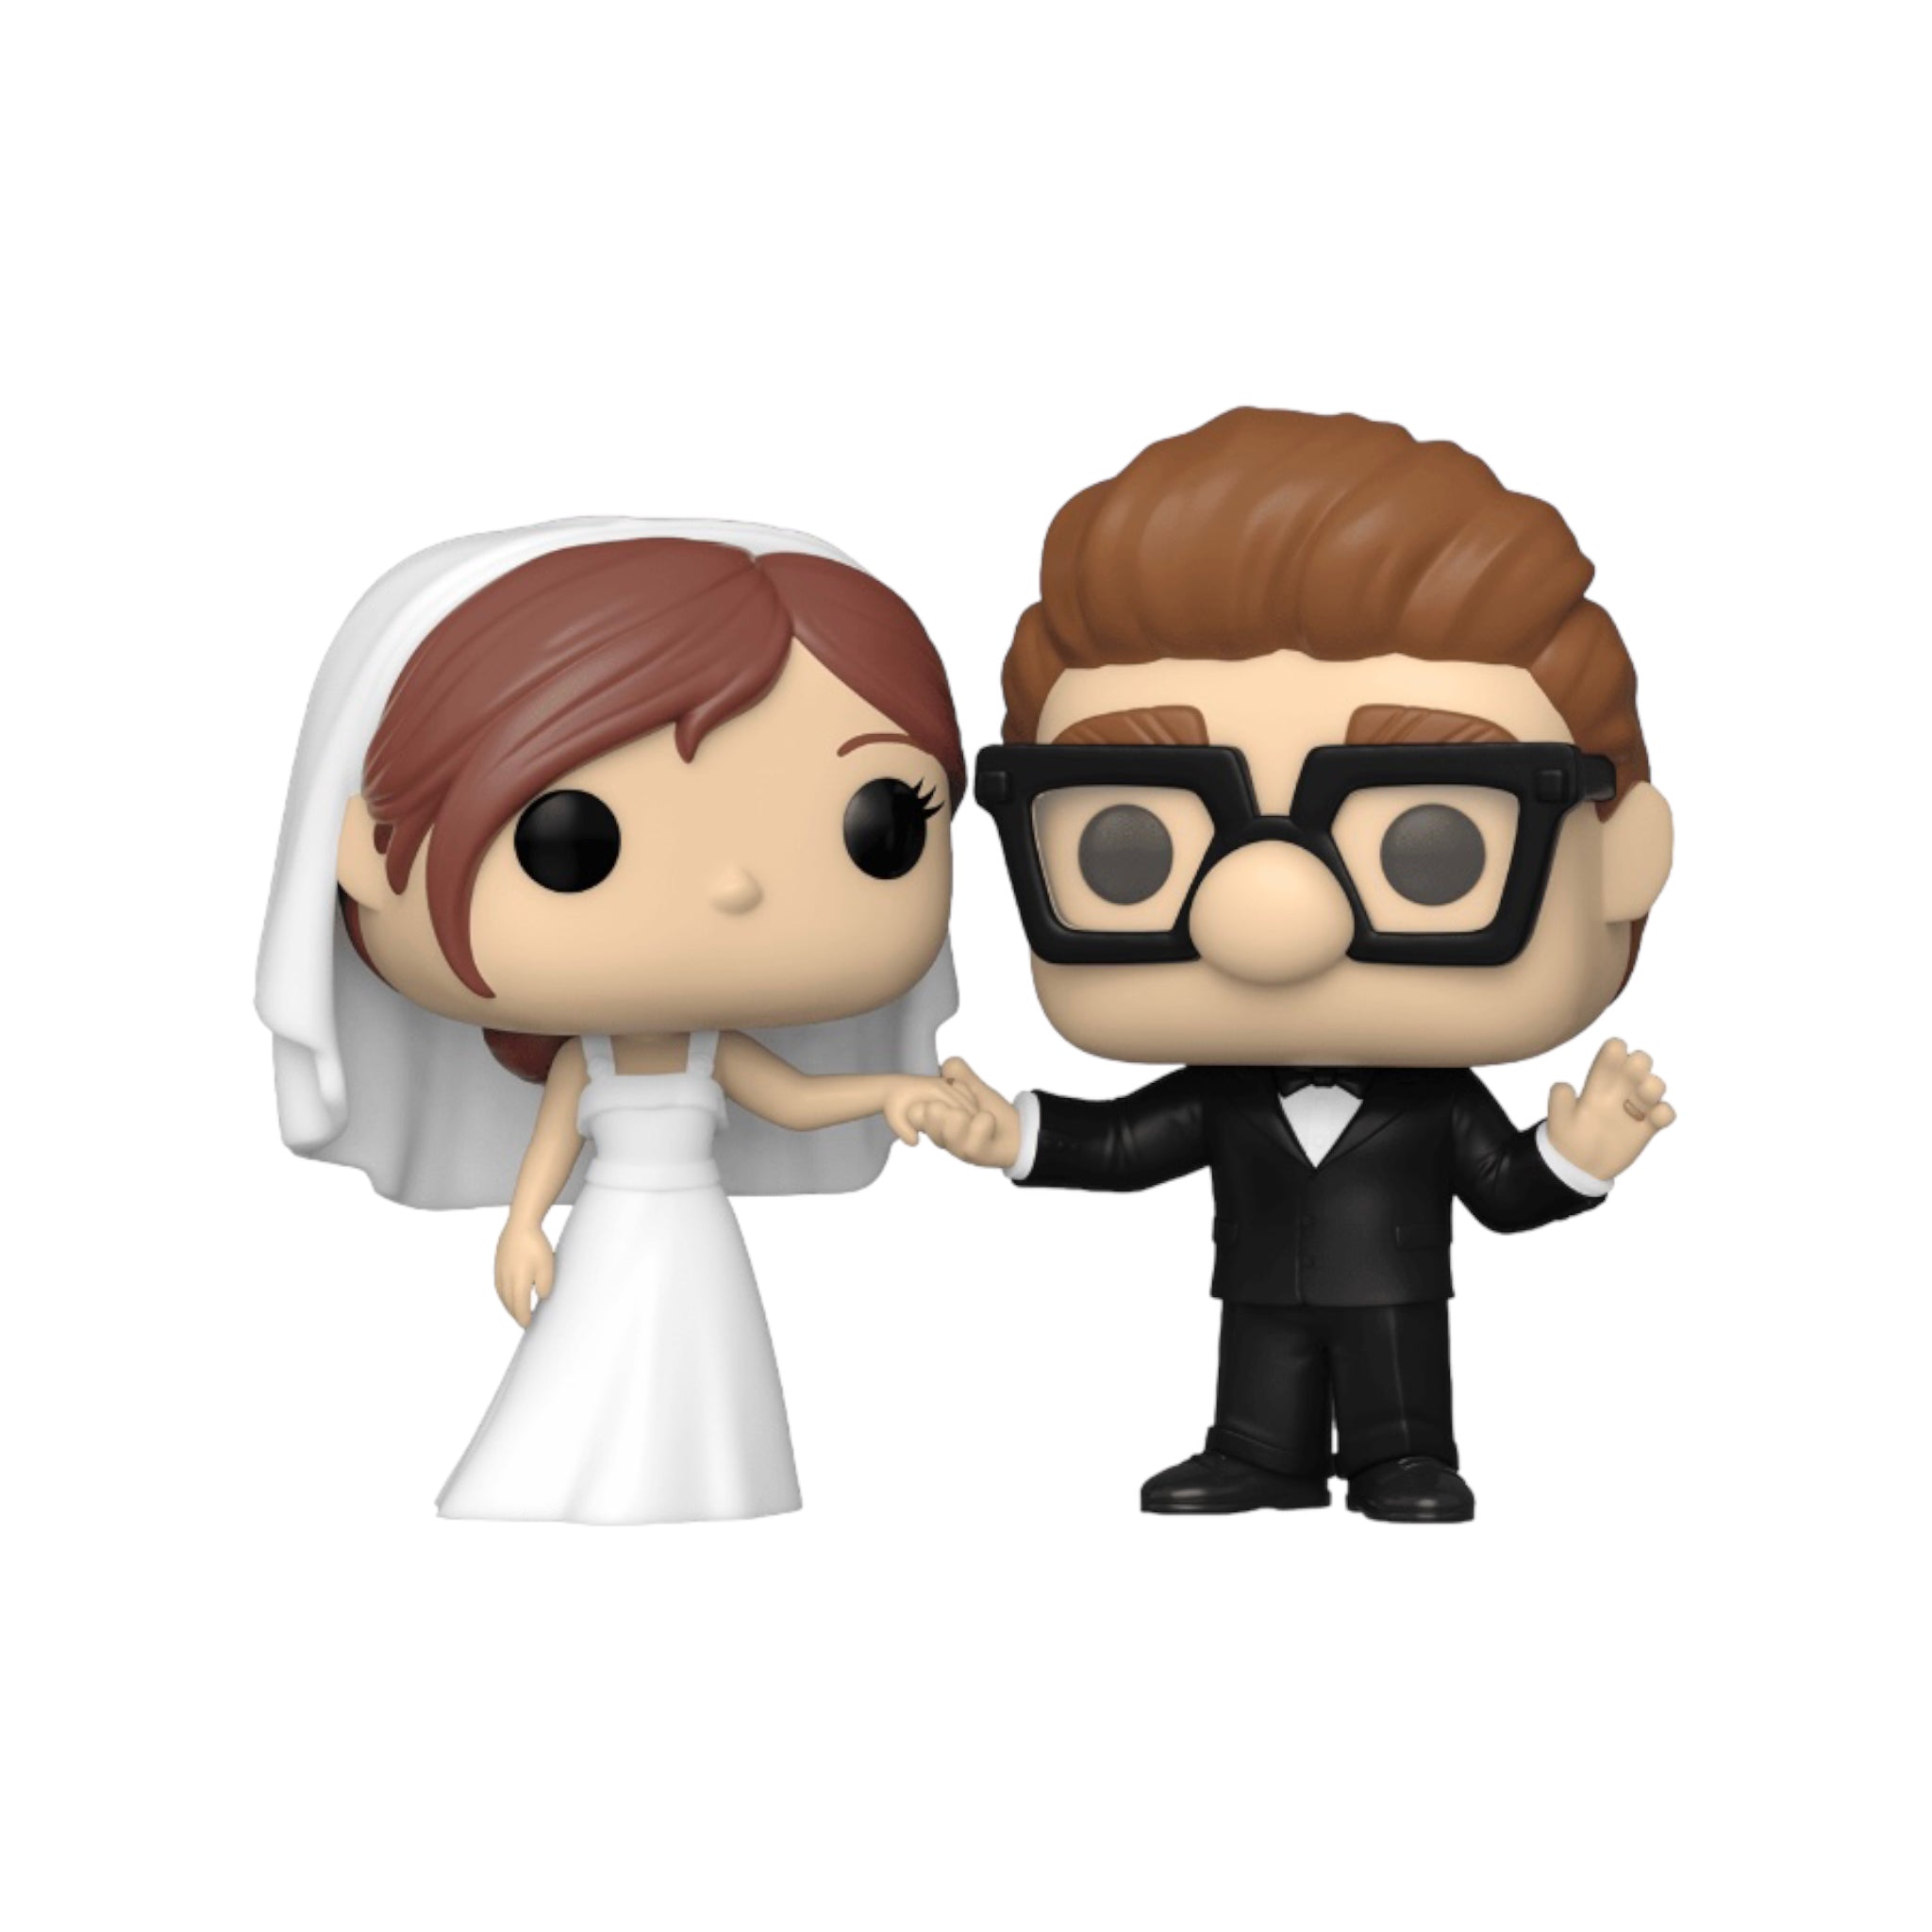 Ellie & Carl (Wedding) 2 Pack Funko Pop! - UP - Special Edition